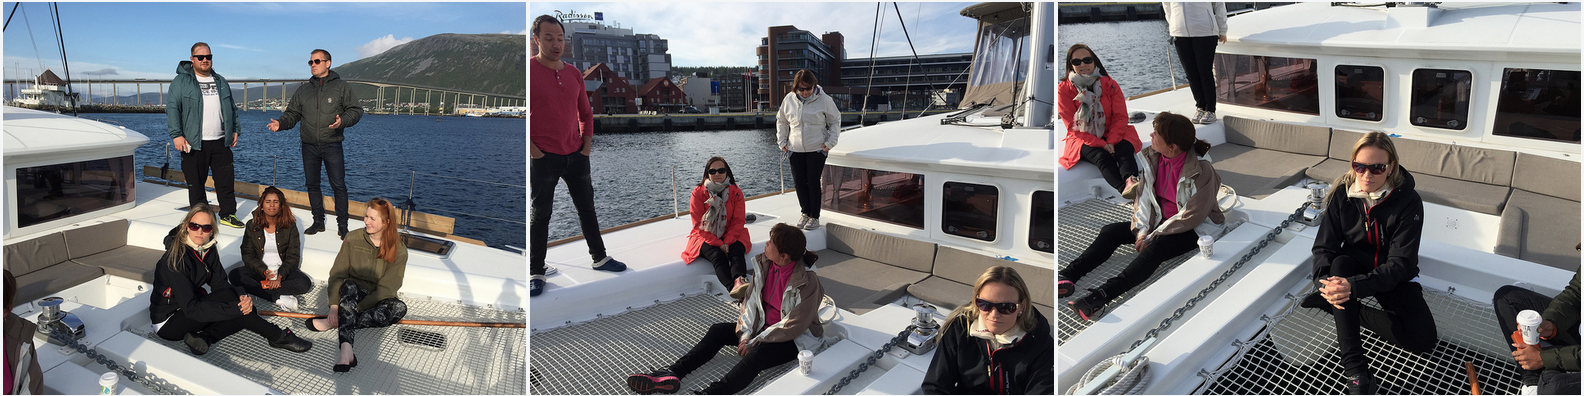 Sailing and relax trip | Tromsoe | Scandic